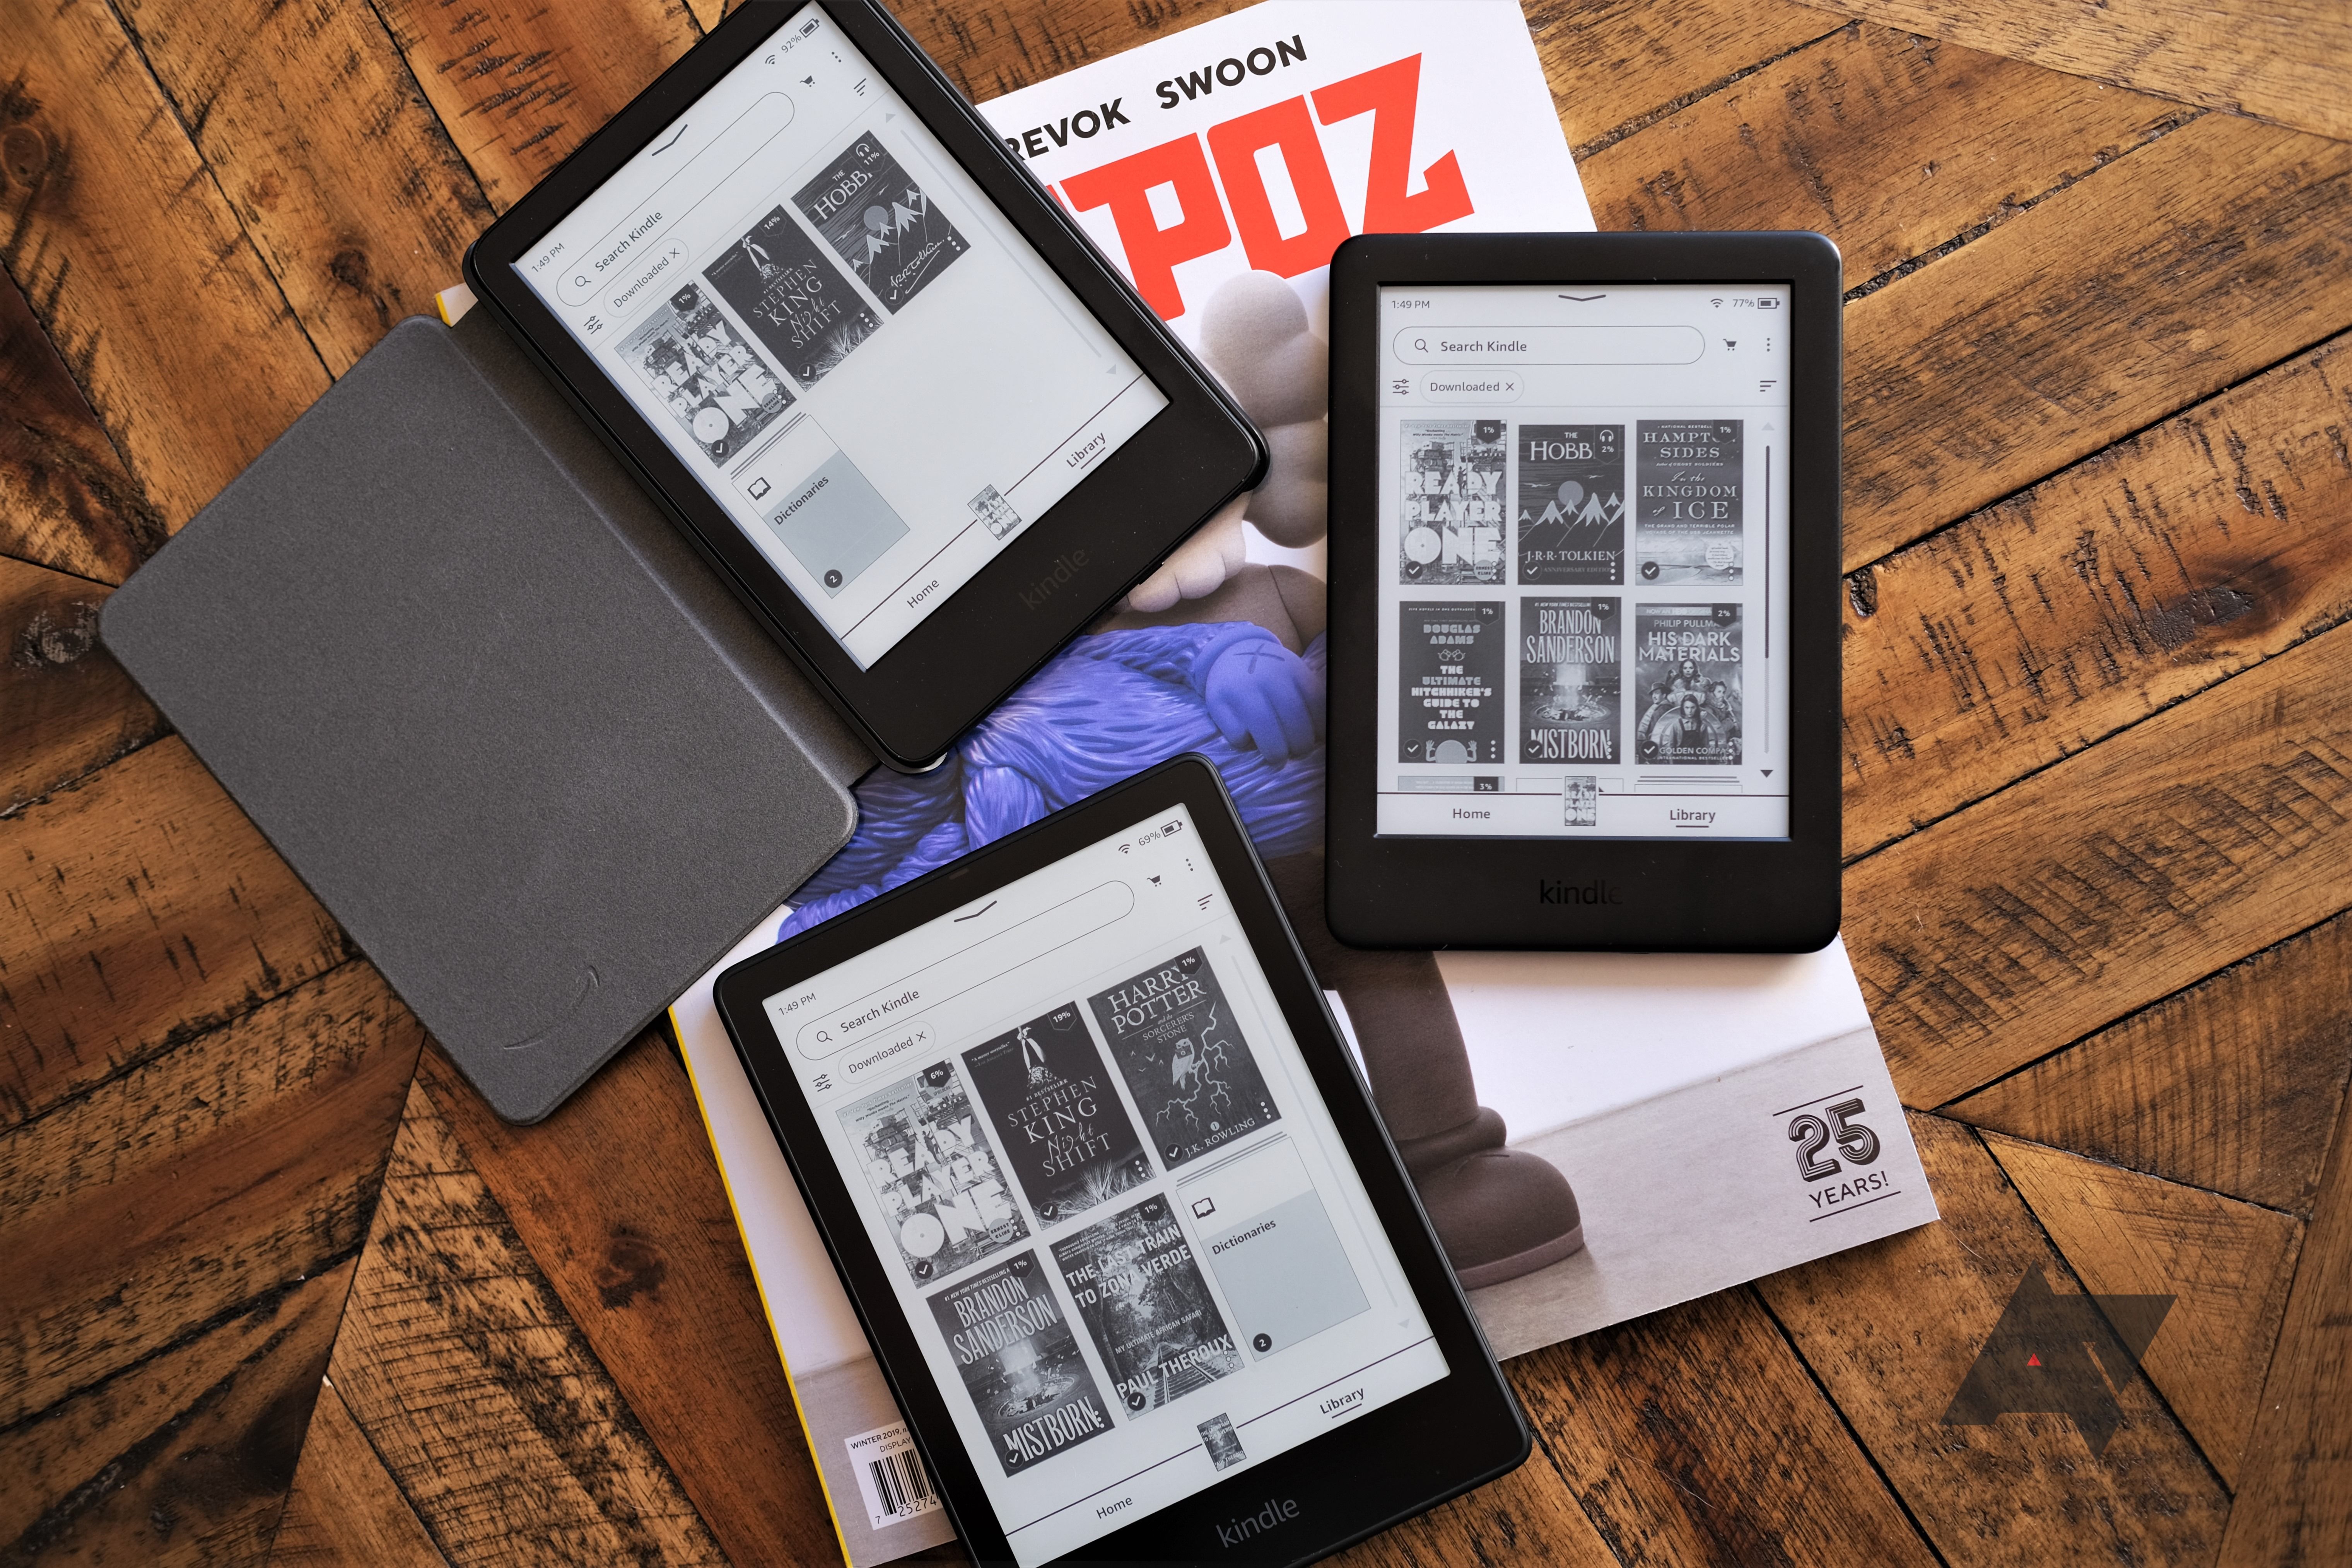 Kindle E-Readers vs Android Tablets: What's Different